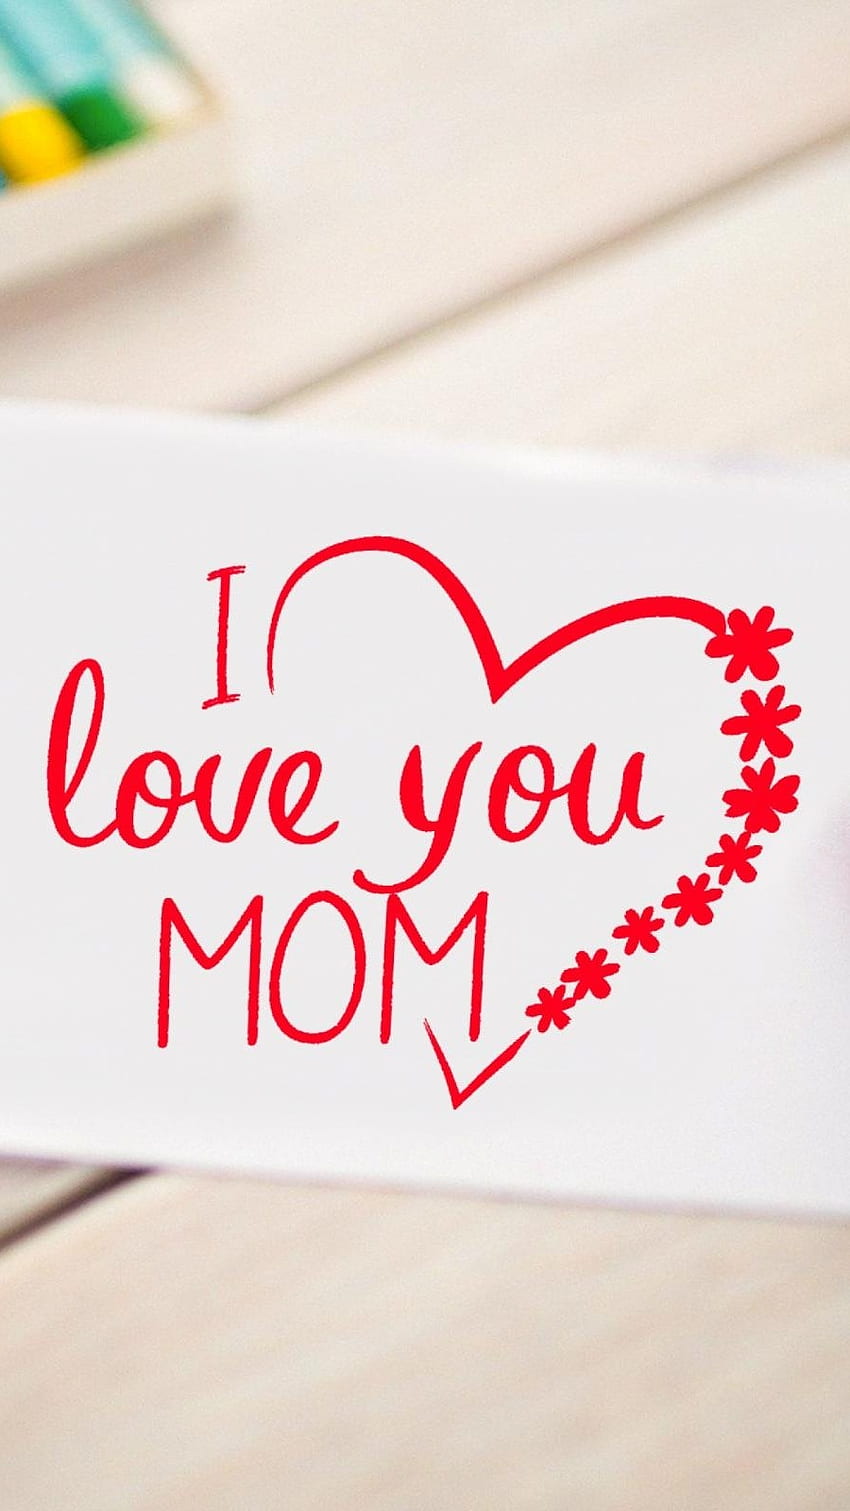 Download I Love You Mom wallpaper by Ikhlas Ilyas  bd  Free on ZEDGE  now Browse millions of popular New latest   I love you mom Love you mom  Love mom quotes